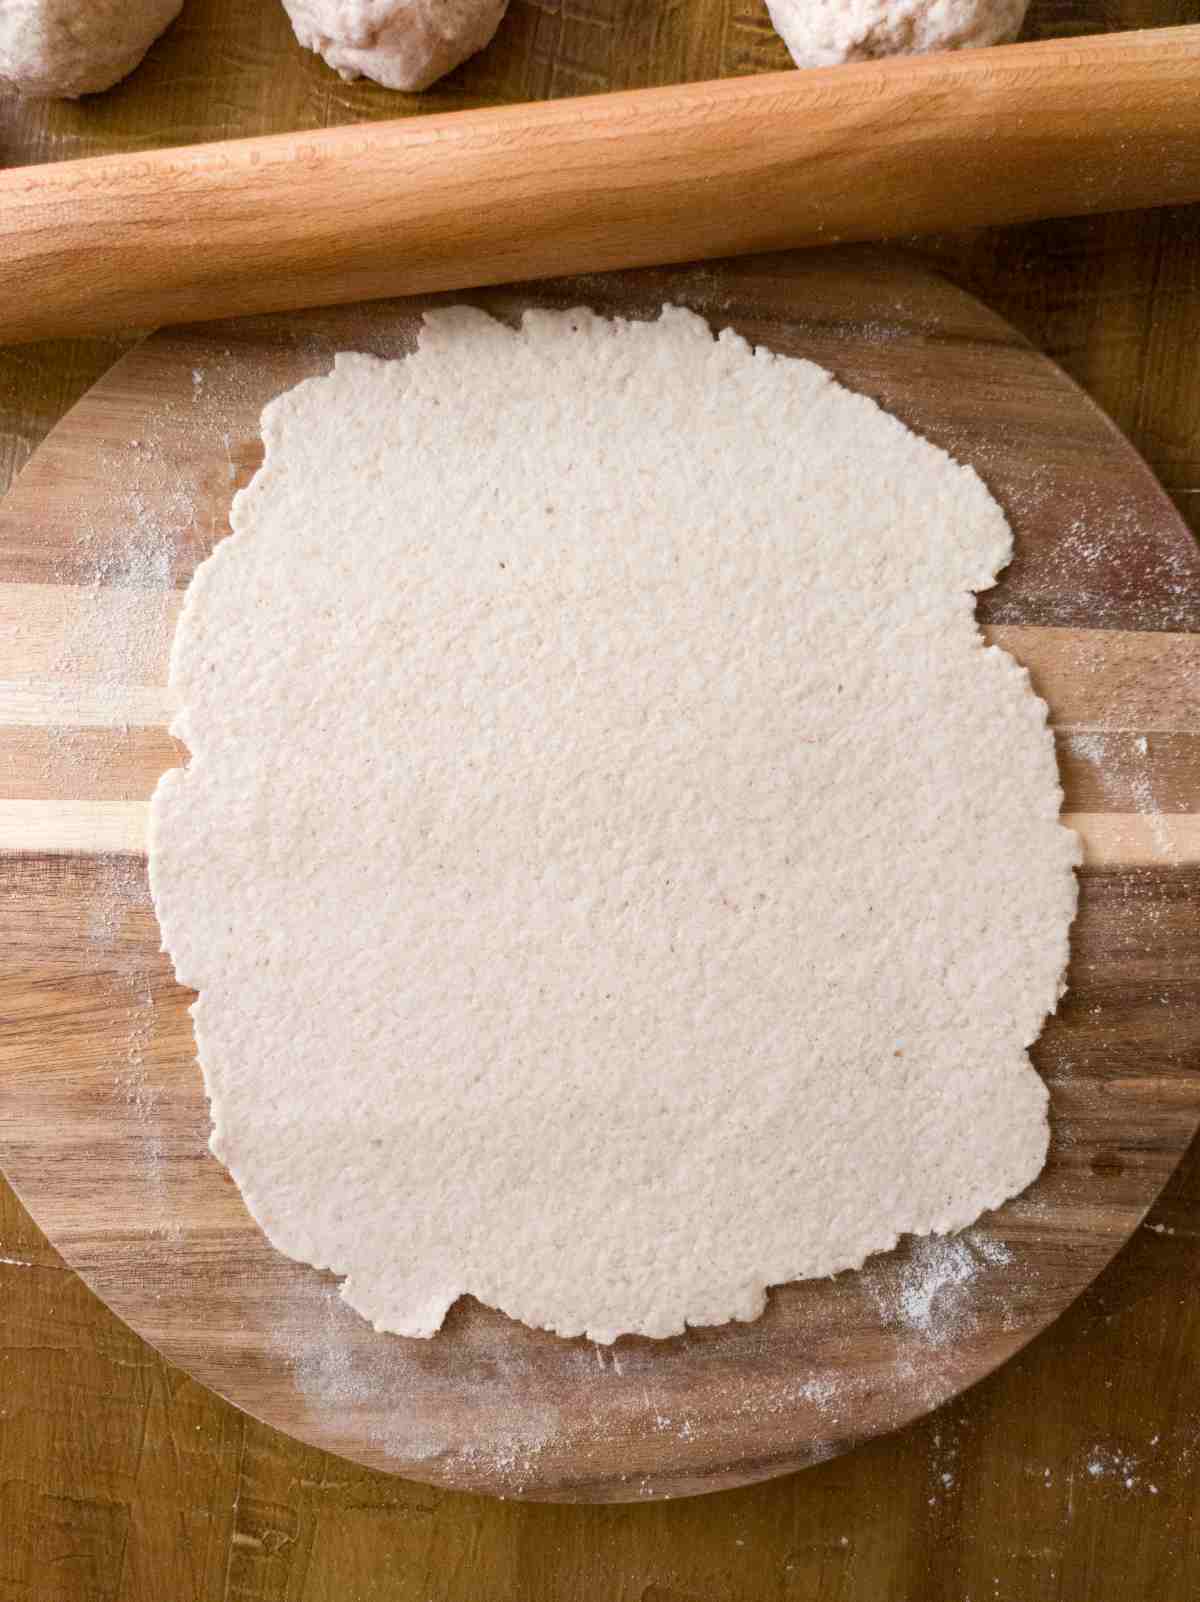 One flatbread rolled out on a cutting board with the rolling pin above it.